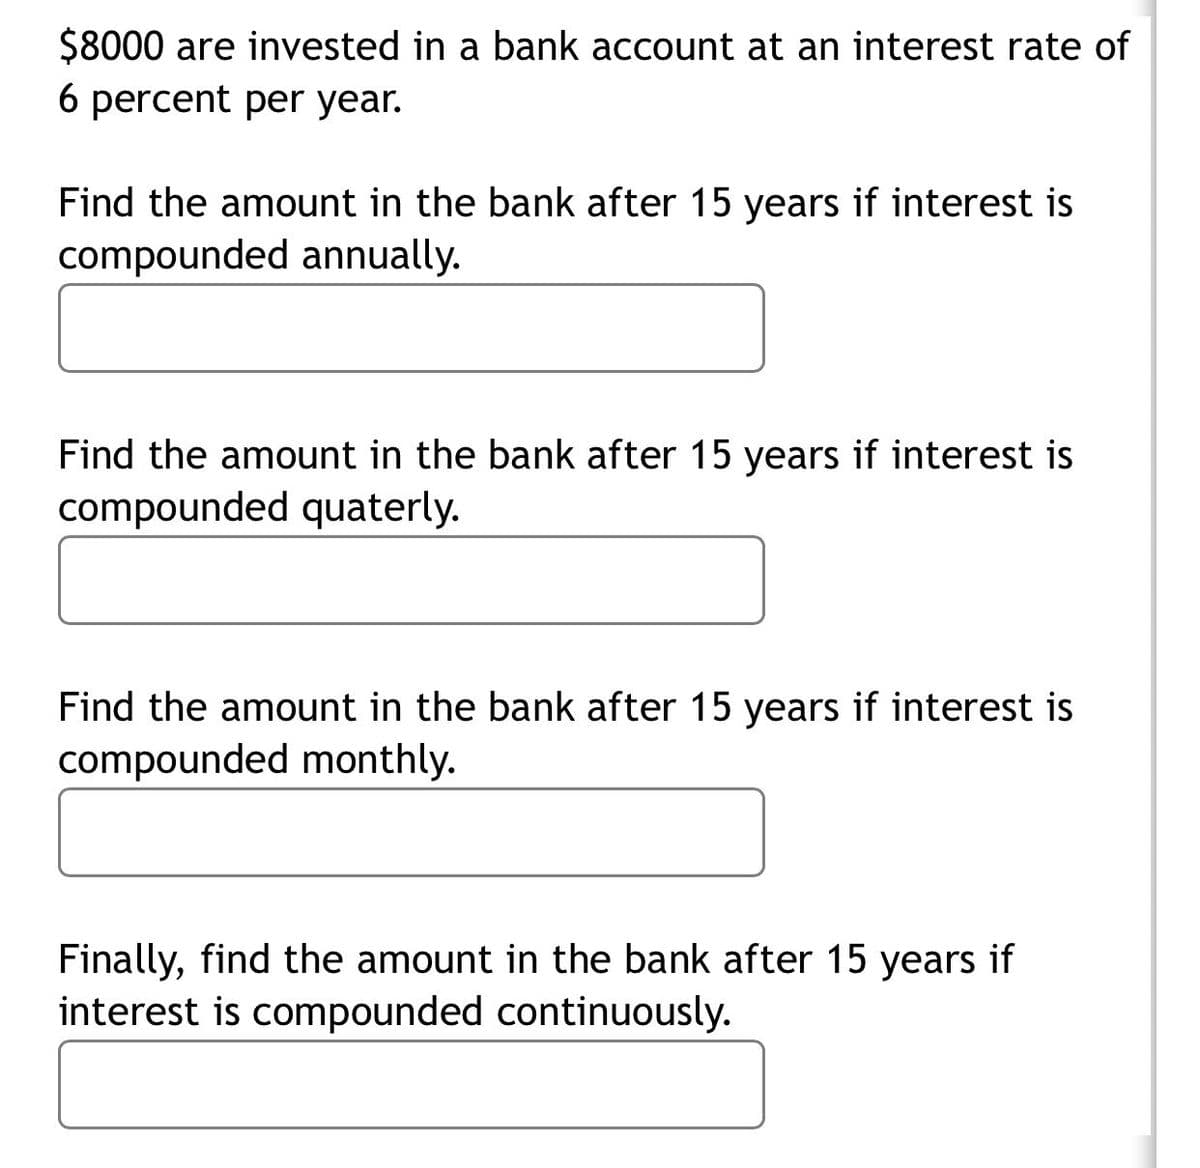 $8000 are invested in a bank account at an interest rate of
6 percent per year.
Find the amount in the bank after 15 years if interest is
compounded annually.
Find the amount in the bank after 15 years if interest is
compounded quaterly.
Find the amount in the bank after 15 years if interest is
compounded monthly.
Finally, find the amount in the bank after 15 years if
interest is compounded continuously.
